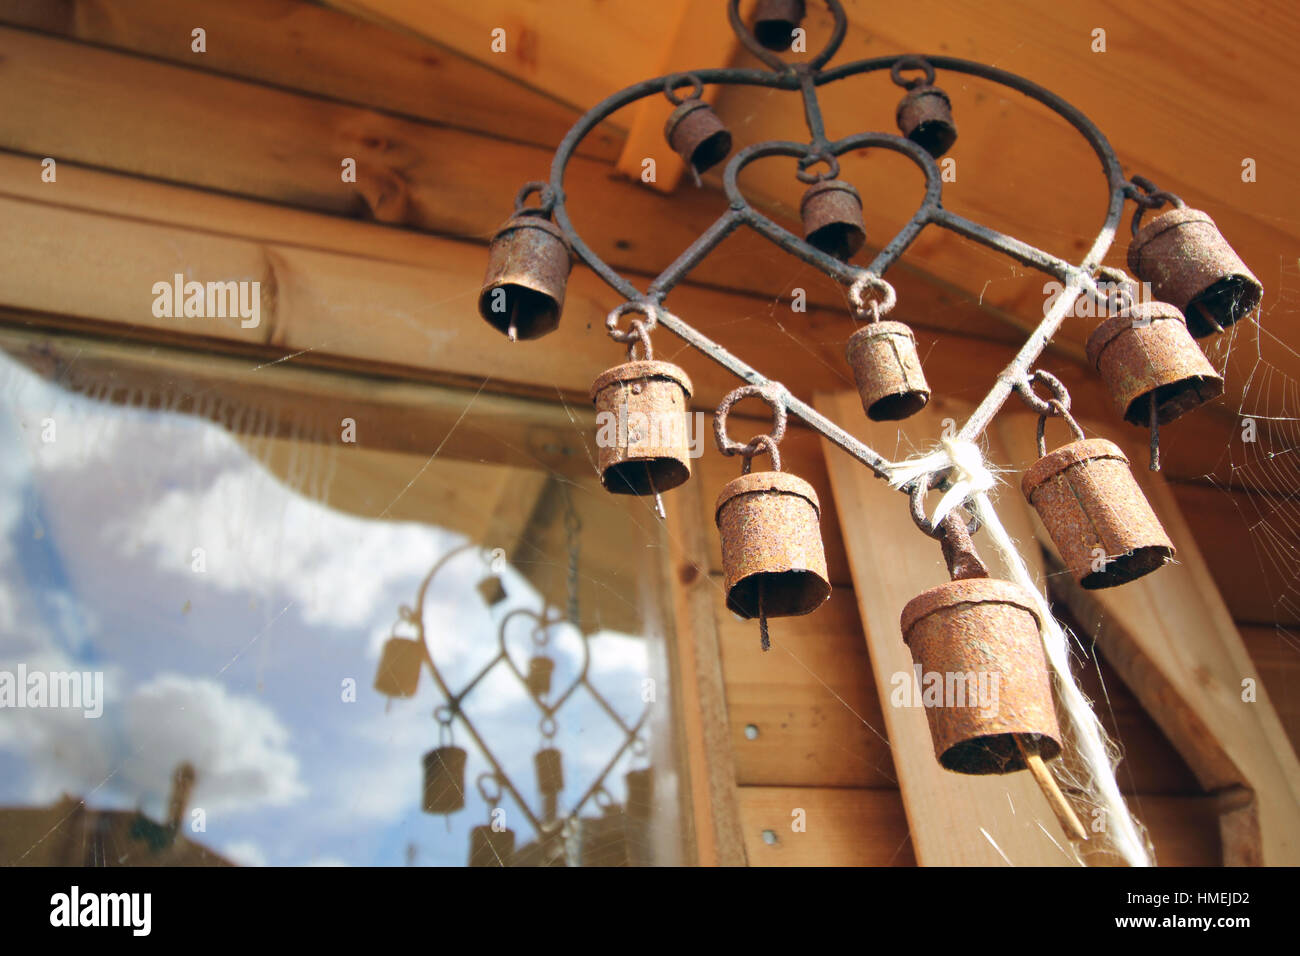 Wind Chime bells Stock Photo